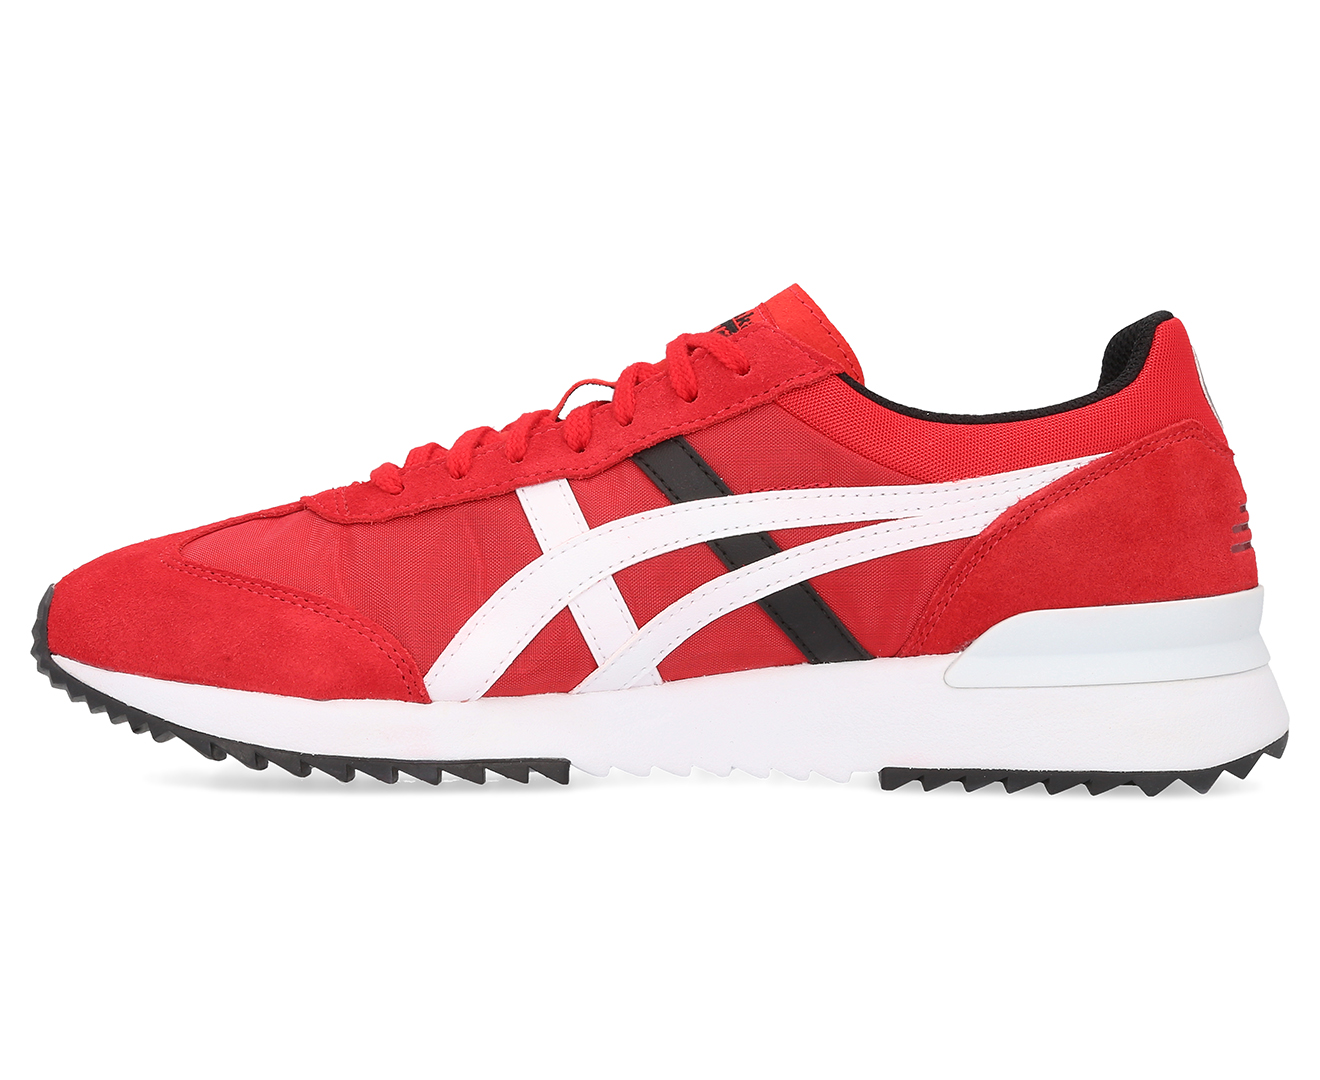 Onitsuka Tiger California 78 Ex Shoe - Red/White | Catch.co.nz